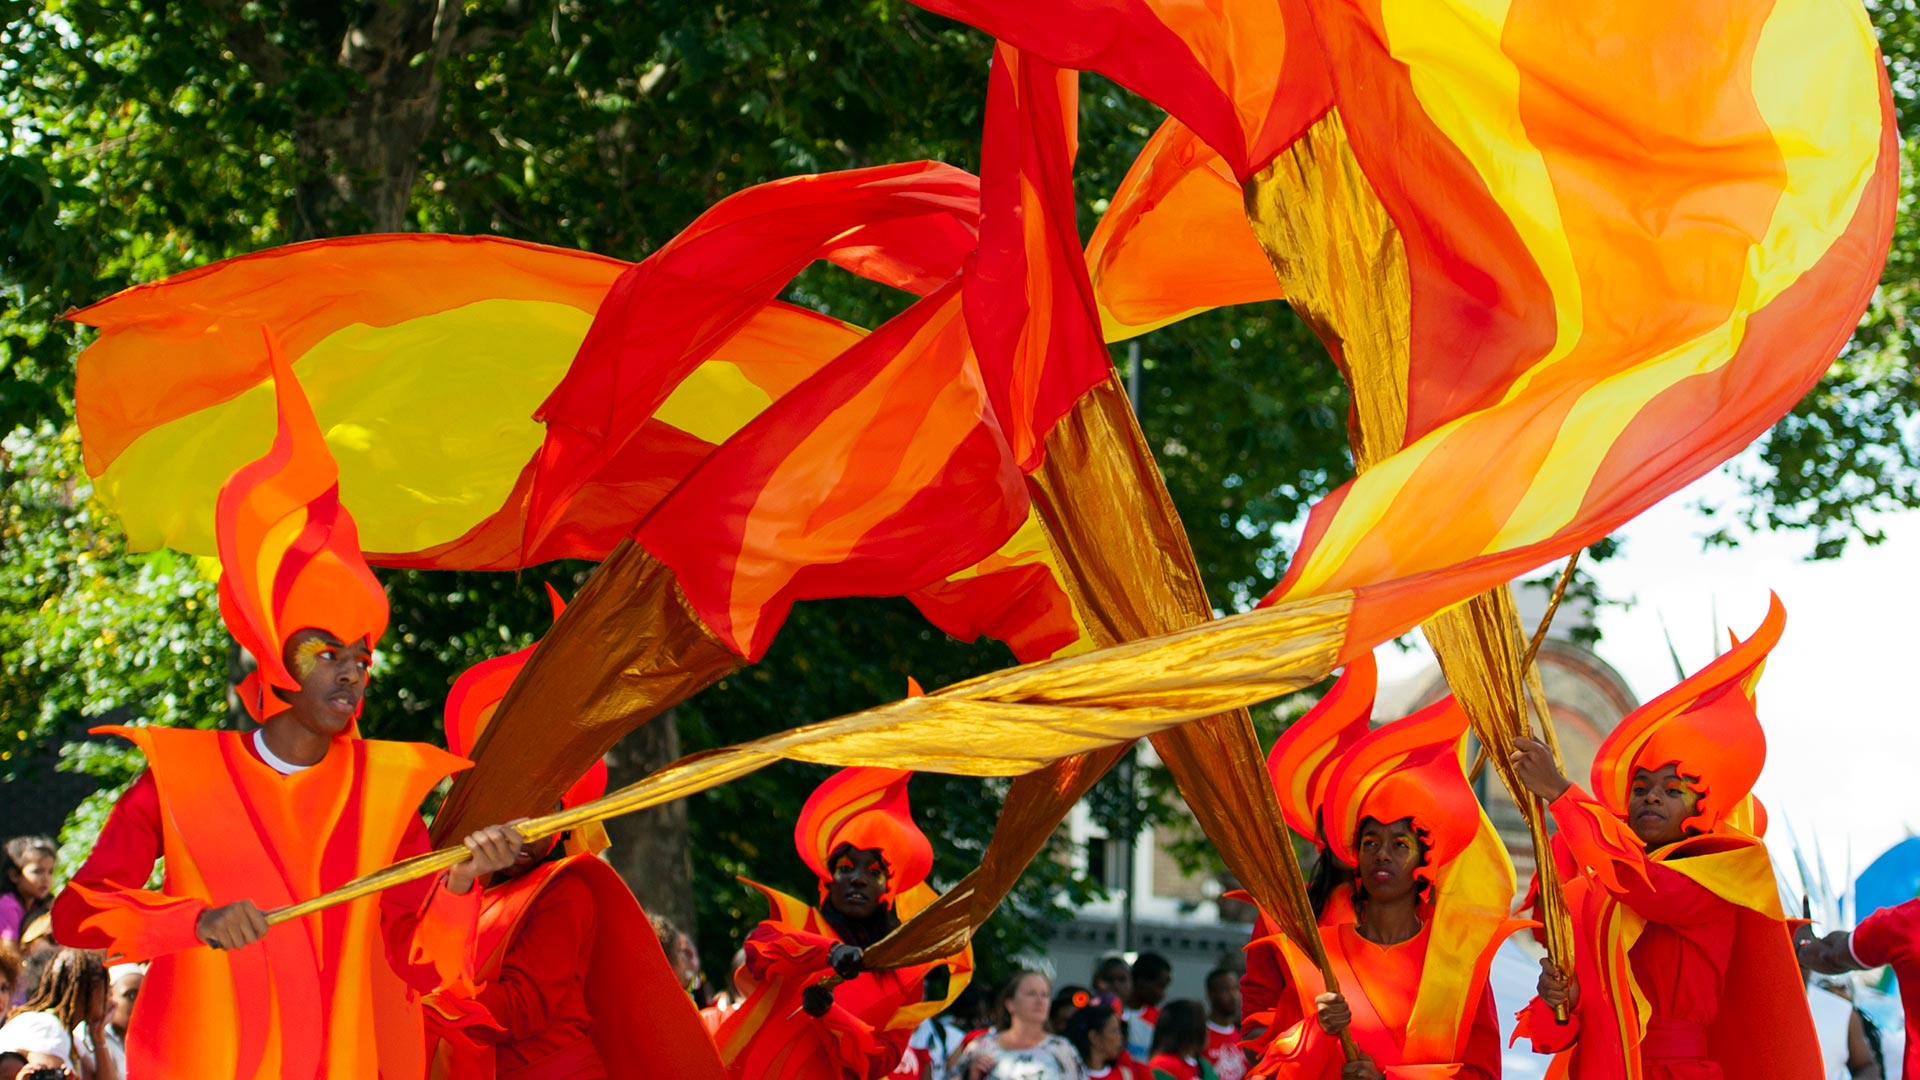 A group of performers swirls orange, yellow and red banners in the air during Notting Hill Carnival.